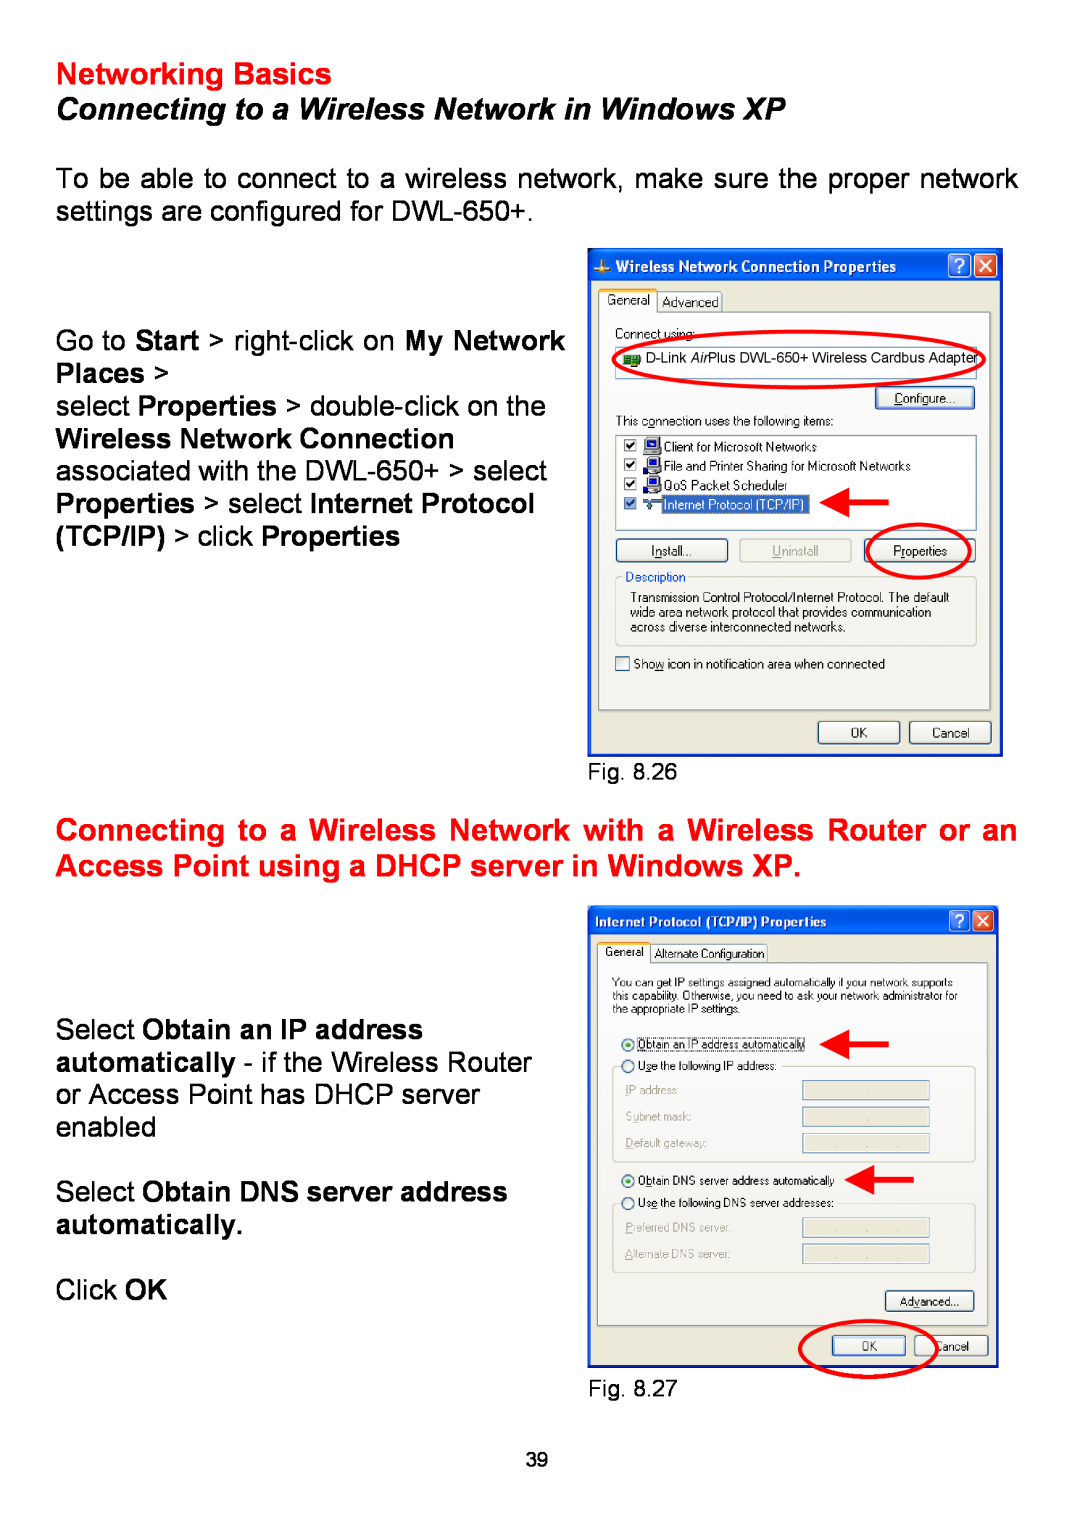 D-Link DWL-650+ manual Connecting to a Wireless Network in Windows XP, Select Obtain DNS server address automatically 